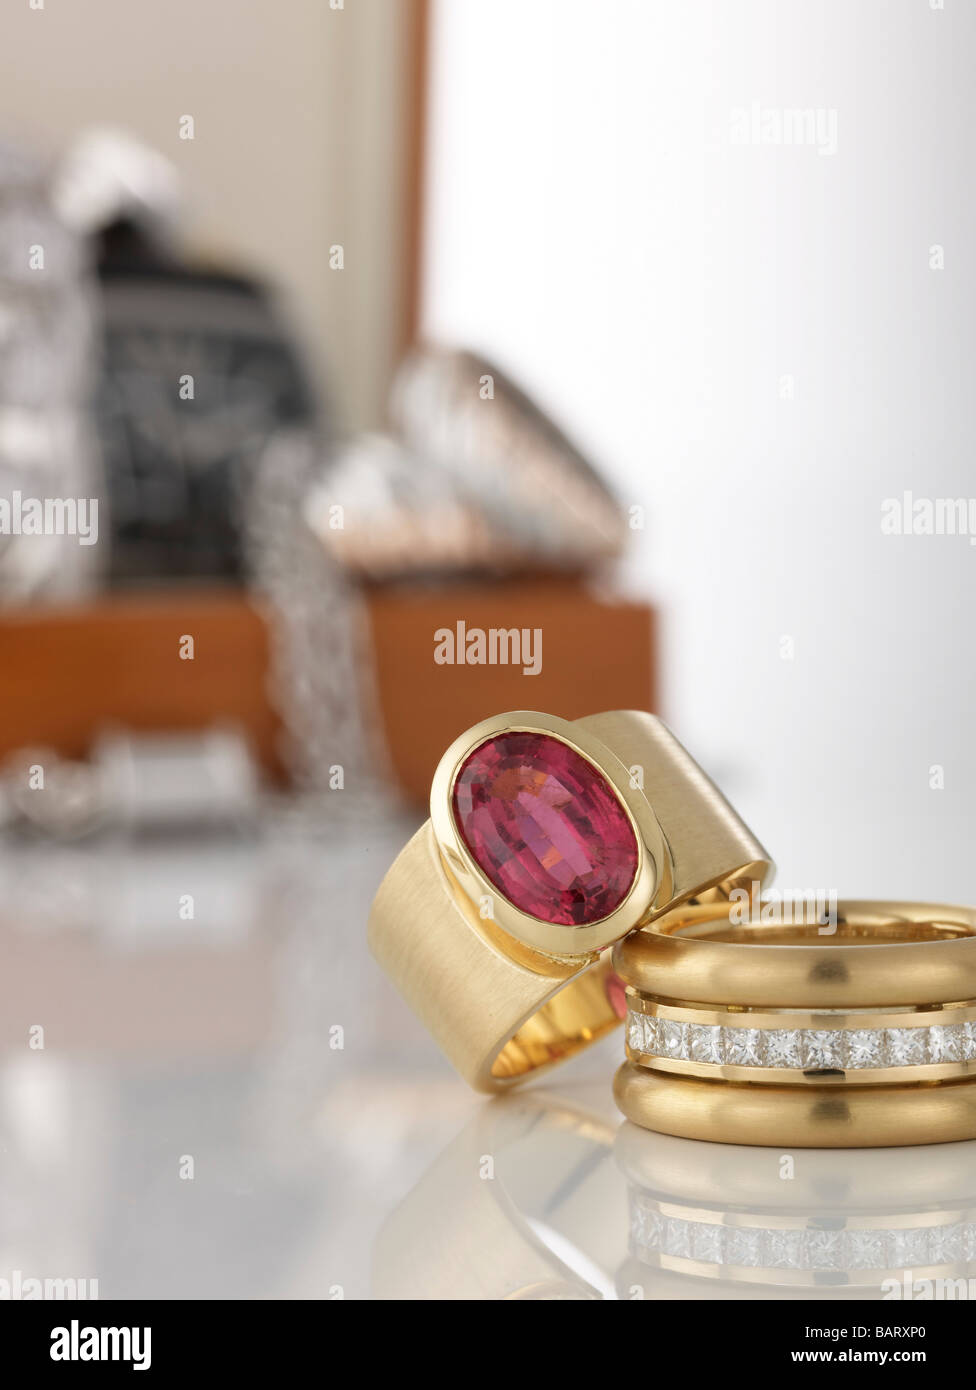 Two rings in foreground, in the background jewel box Stock Photo